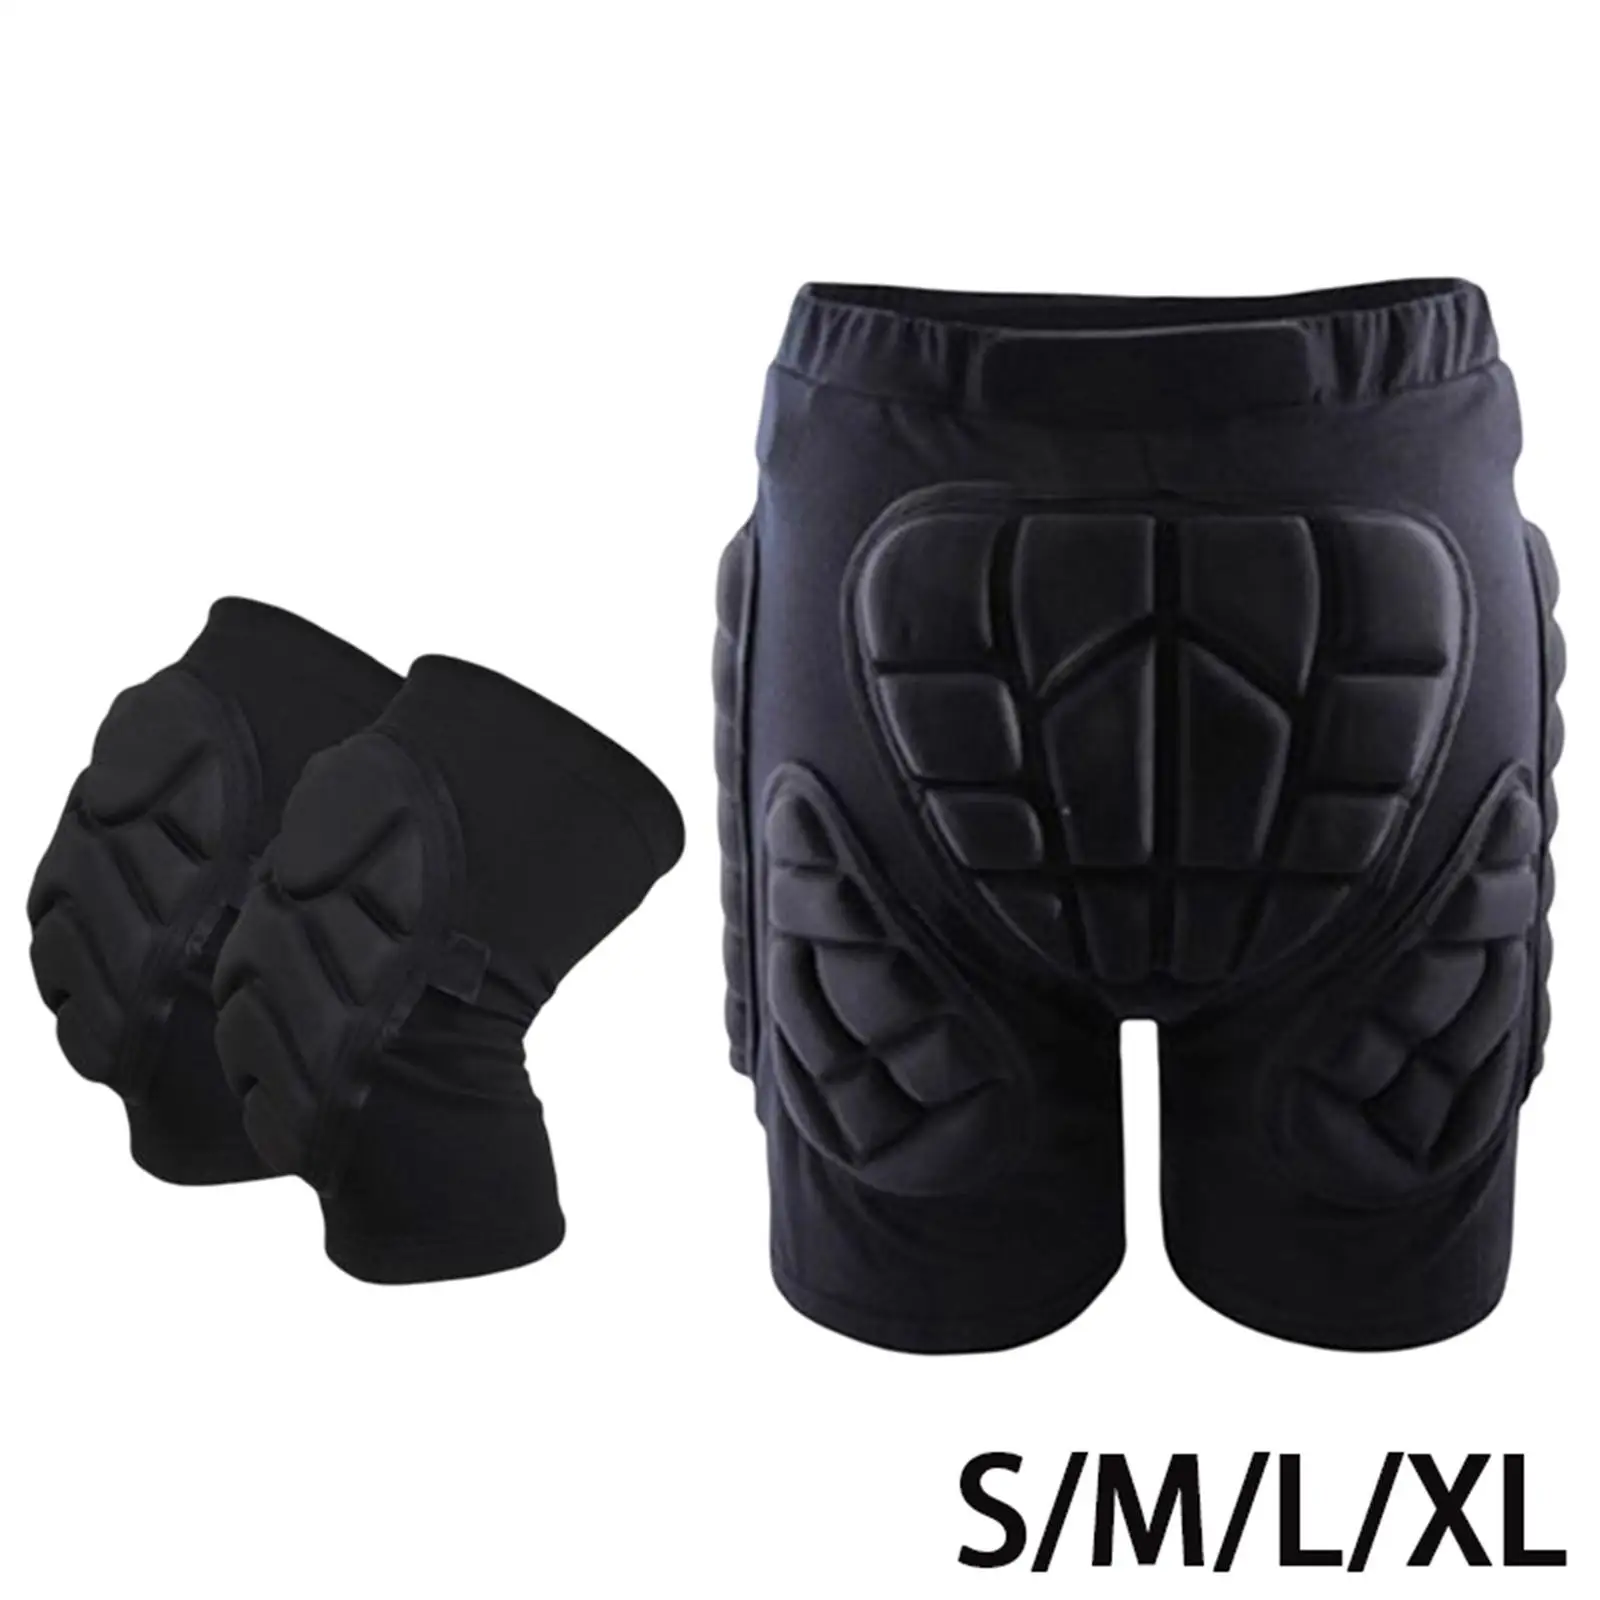 Hip Pad  Protective Gear  Padded Shorts for Skiing Men Women